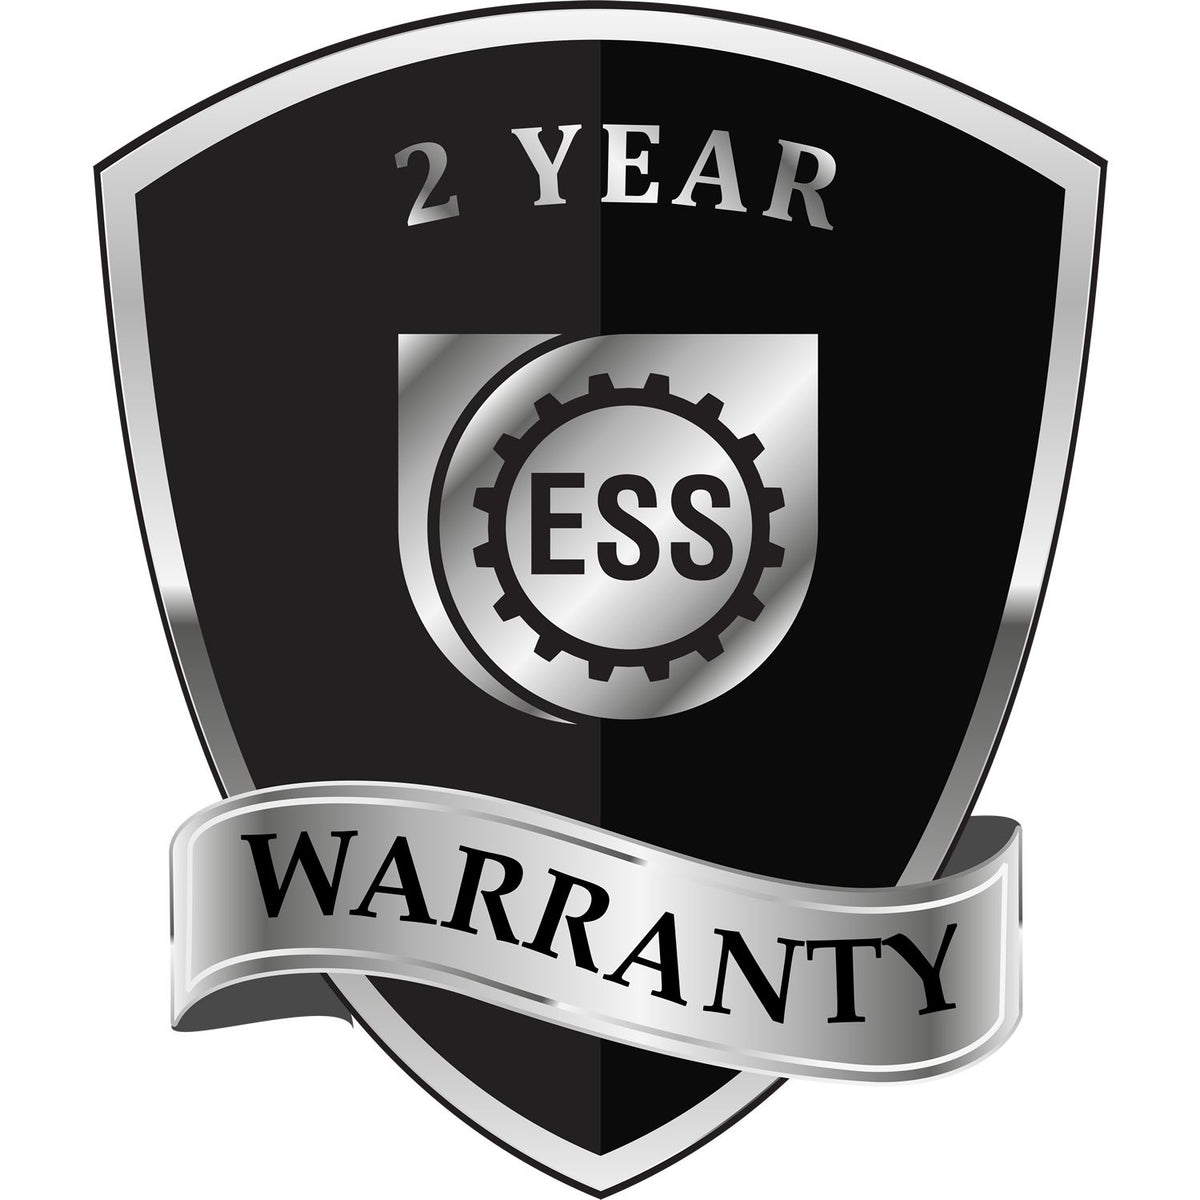 A black and silver badge or emblem showing warranty information for the Gift Wisconsin Geologist Seal